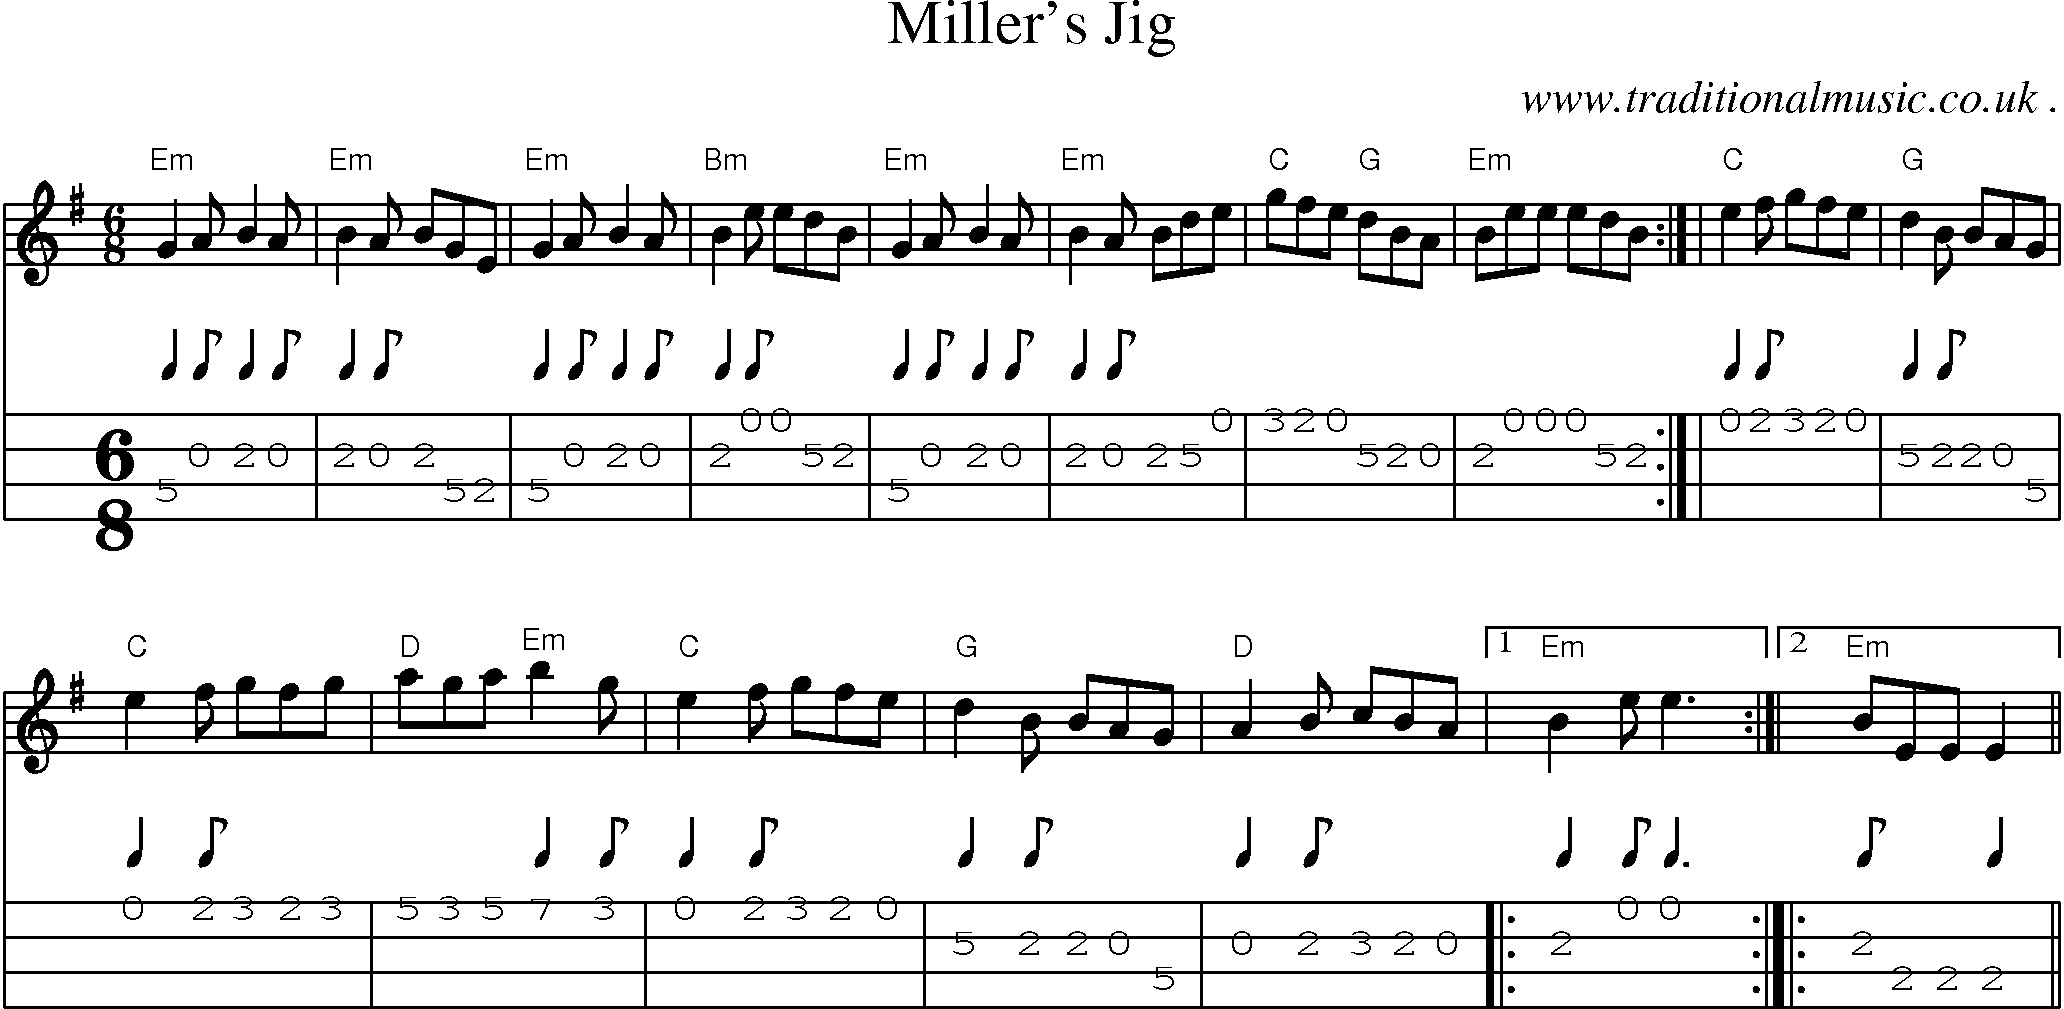 Sheet-music  score, Chords and Mandolin Tabs for Millers Jig